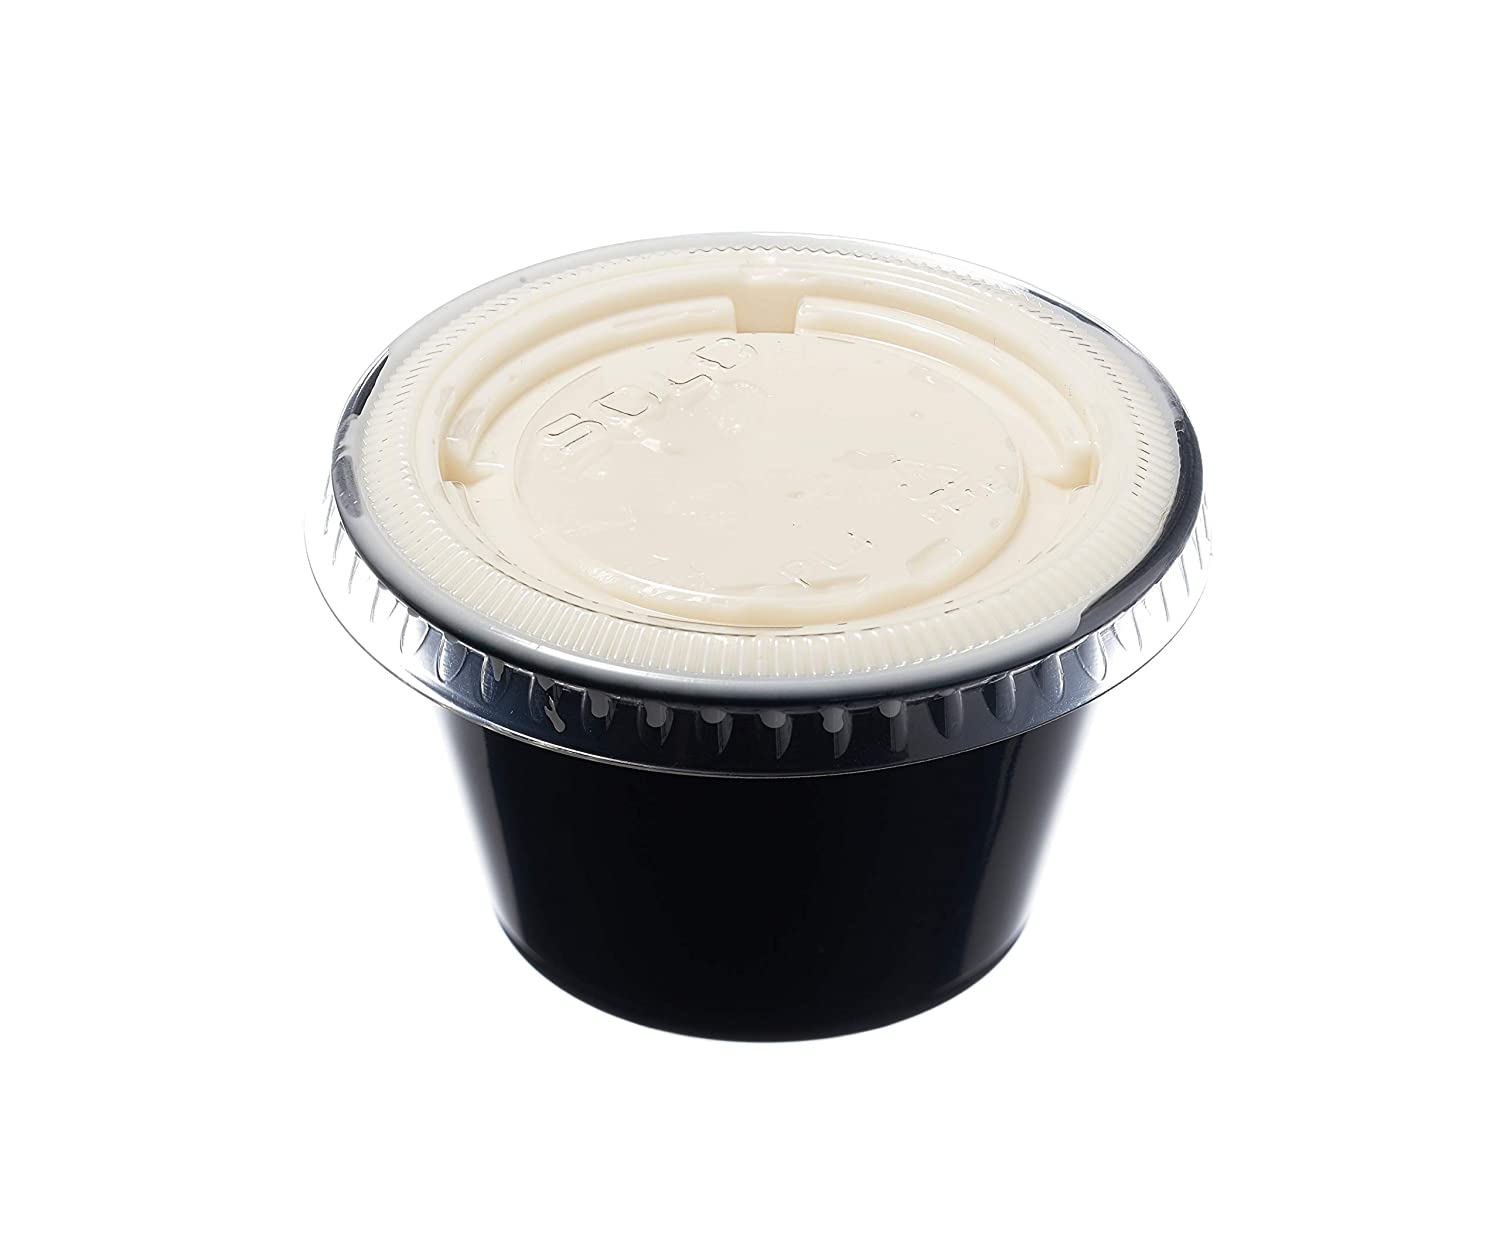 black condiment cup leakproof stackablecups ecofriendly food packaging dipping cup delivery supplies togo cup with lid tasting cups souffle cups shot cup jelloshot tasting cup taste cup portion cup deliverysolutions food packaging disposablecups ketchup mustard cup artsandcraft small cup travel size cup mouthwash cup 1 oz 1 ounce 2 oz 2 ounce 4 oz 4 ounce cup with lid hotsauce cup